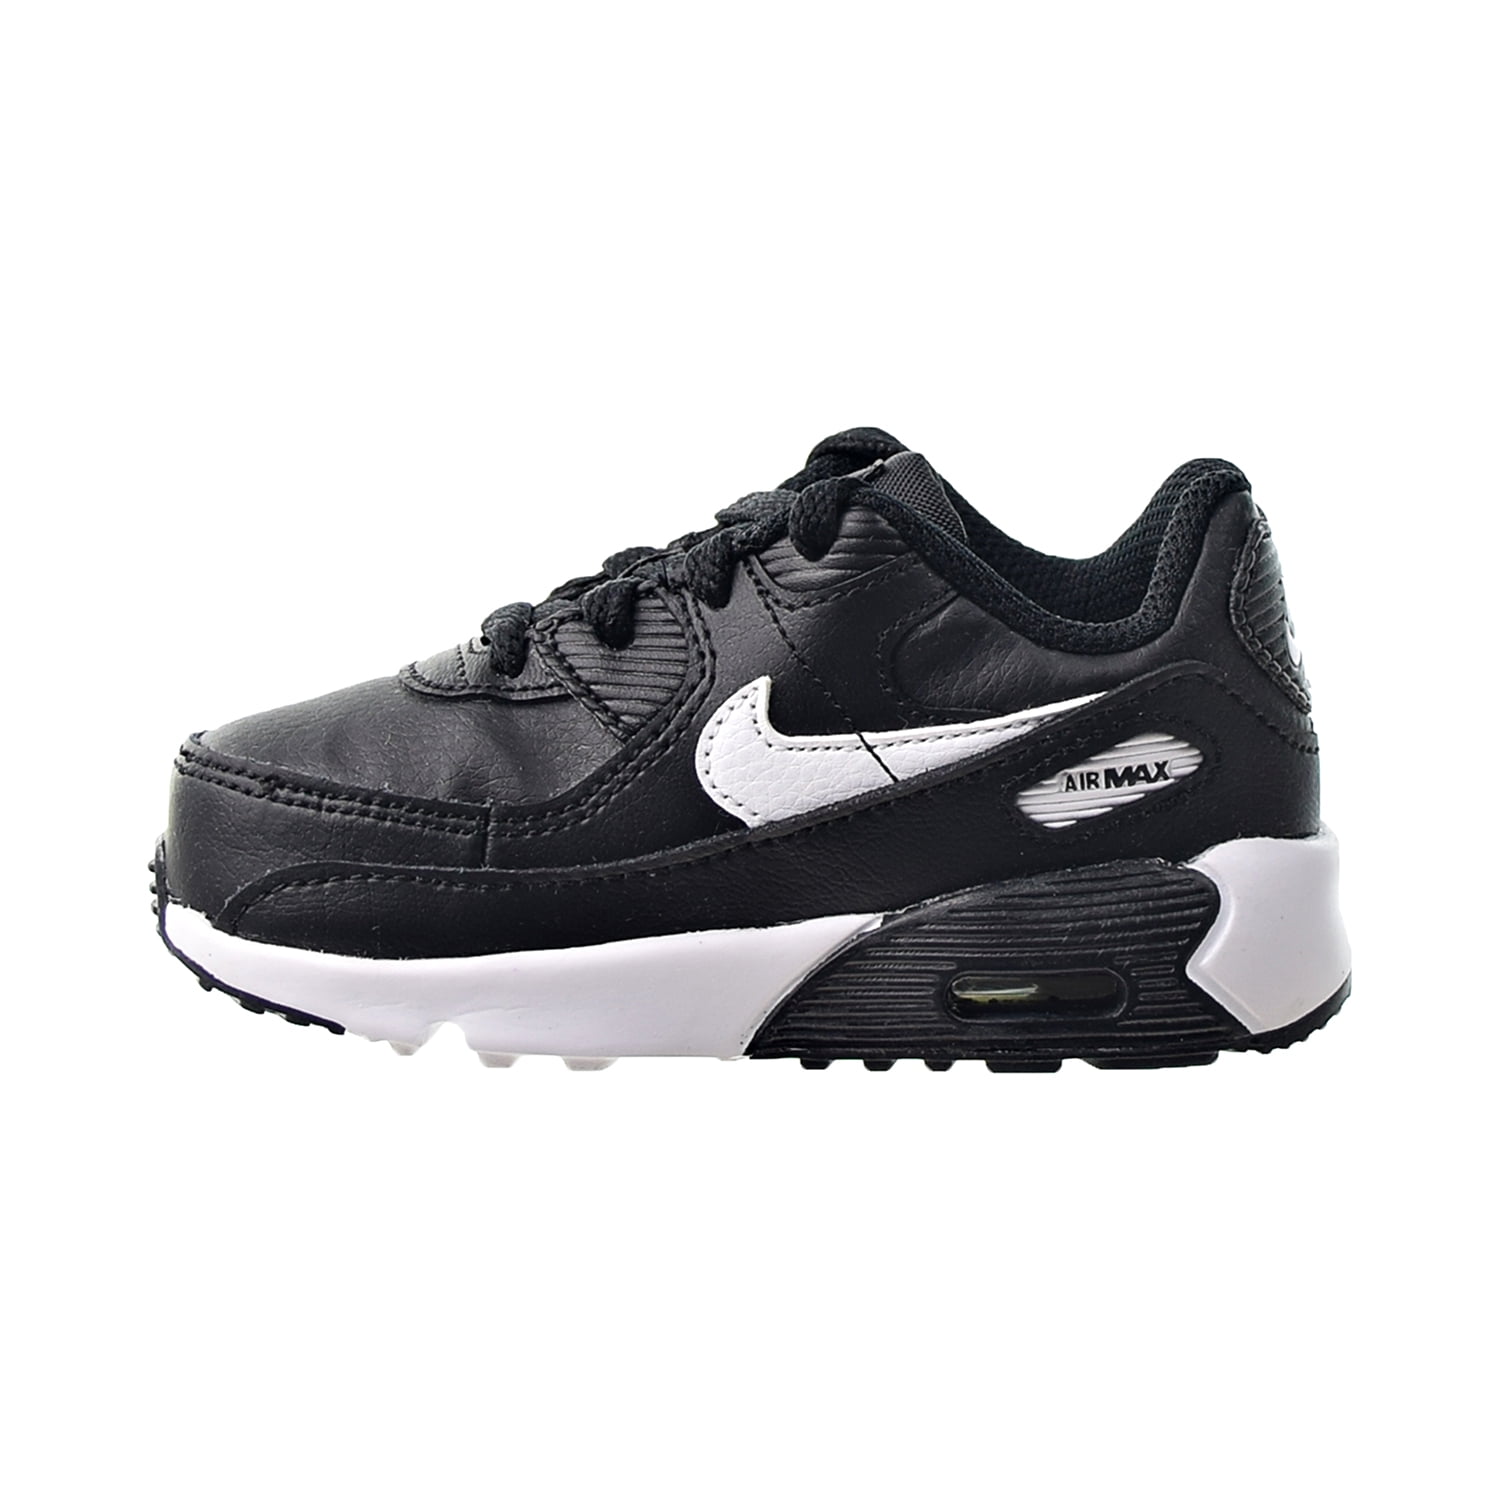 Nike Air Max 90 LTR Toddlers' Shoes Black-Black-White cd6868-010 